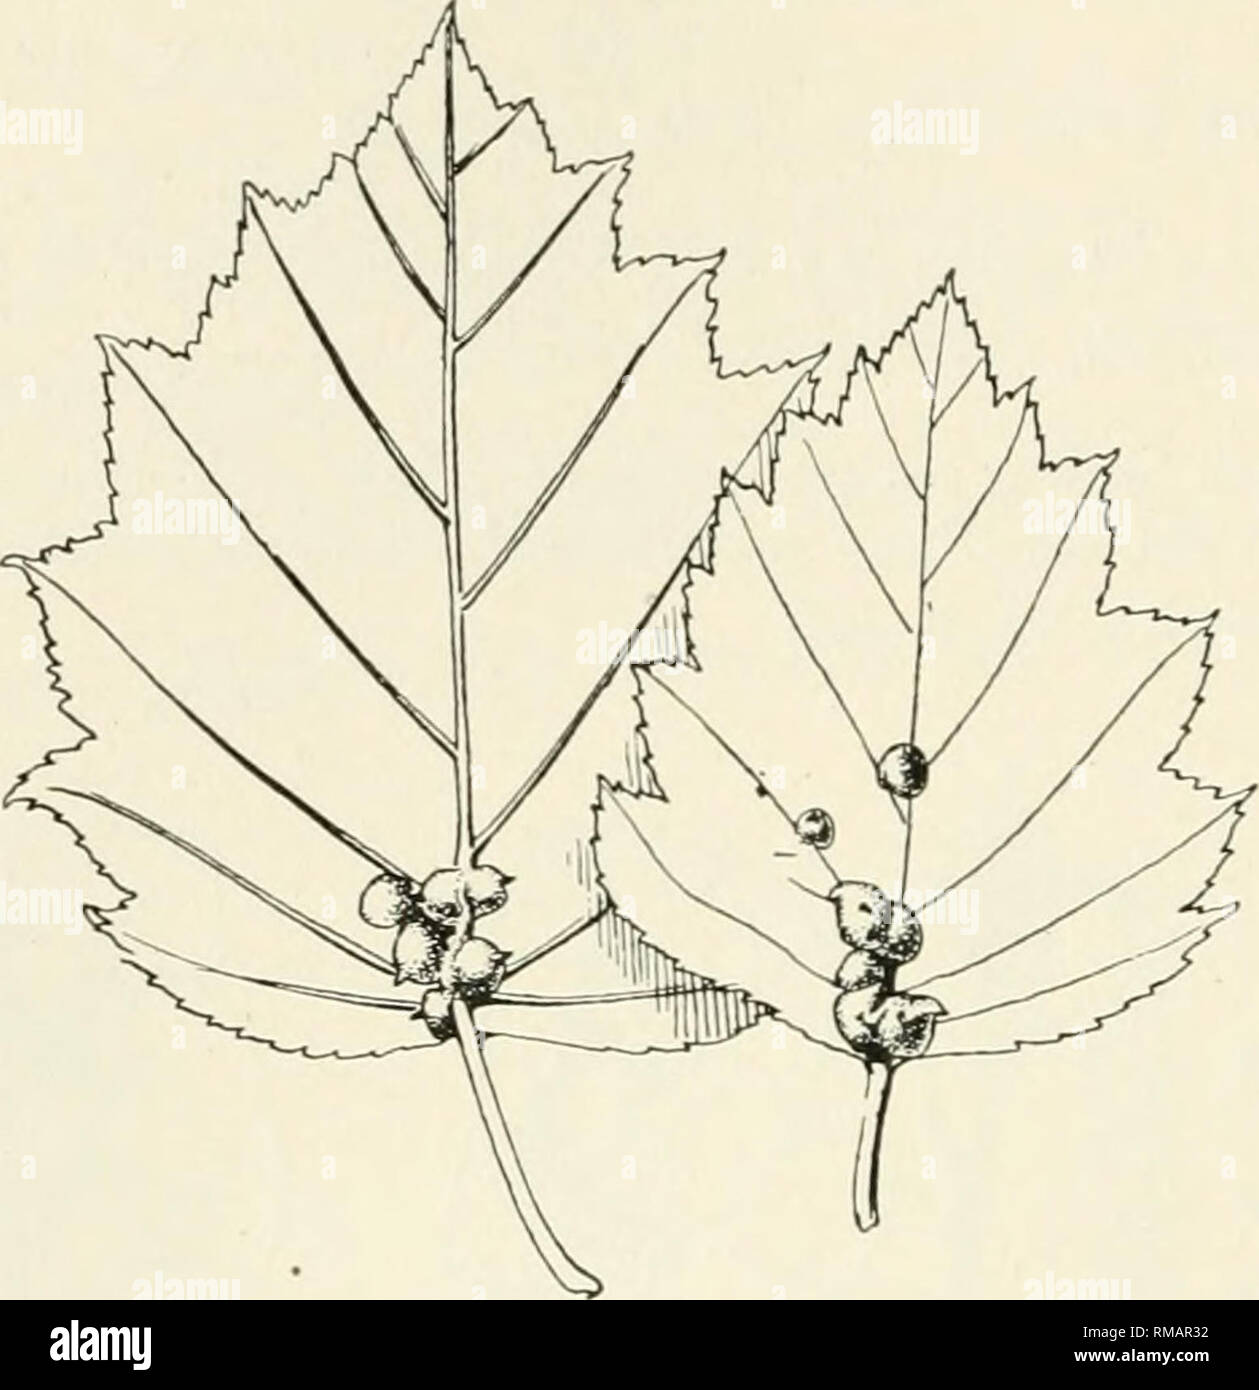 . Annual report. New York State Museum; Science -- New York (State); Plants -- New York (State); Animals -- New York (State). 136 NEW YORK STATE MUSEUM Irregularly oval, frequently fissured twig gall, length 3 to 4 cm, diameter 2.5 cm. Felt and Joutel '04, p. 62 Coleop. Thorn limb borer, Saperda fayi Bland.. Fig. 137. Cecidomyia sp. on Crataegus, 32727. (Original) Irregular twig swelling, resembling black knot of plum but with bright red spores, length 1-2 cm, on C. o x y c a n t h a. Fungus. Cedar rust, Gymnosporangium globosum. Please note that these images are extracted from scanned page im Stock Photo